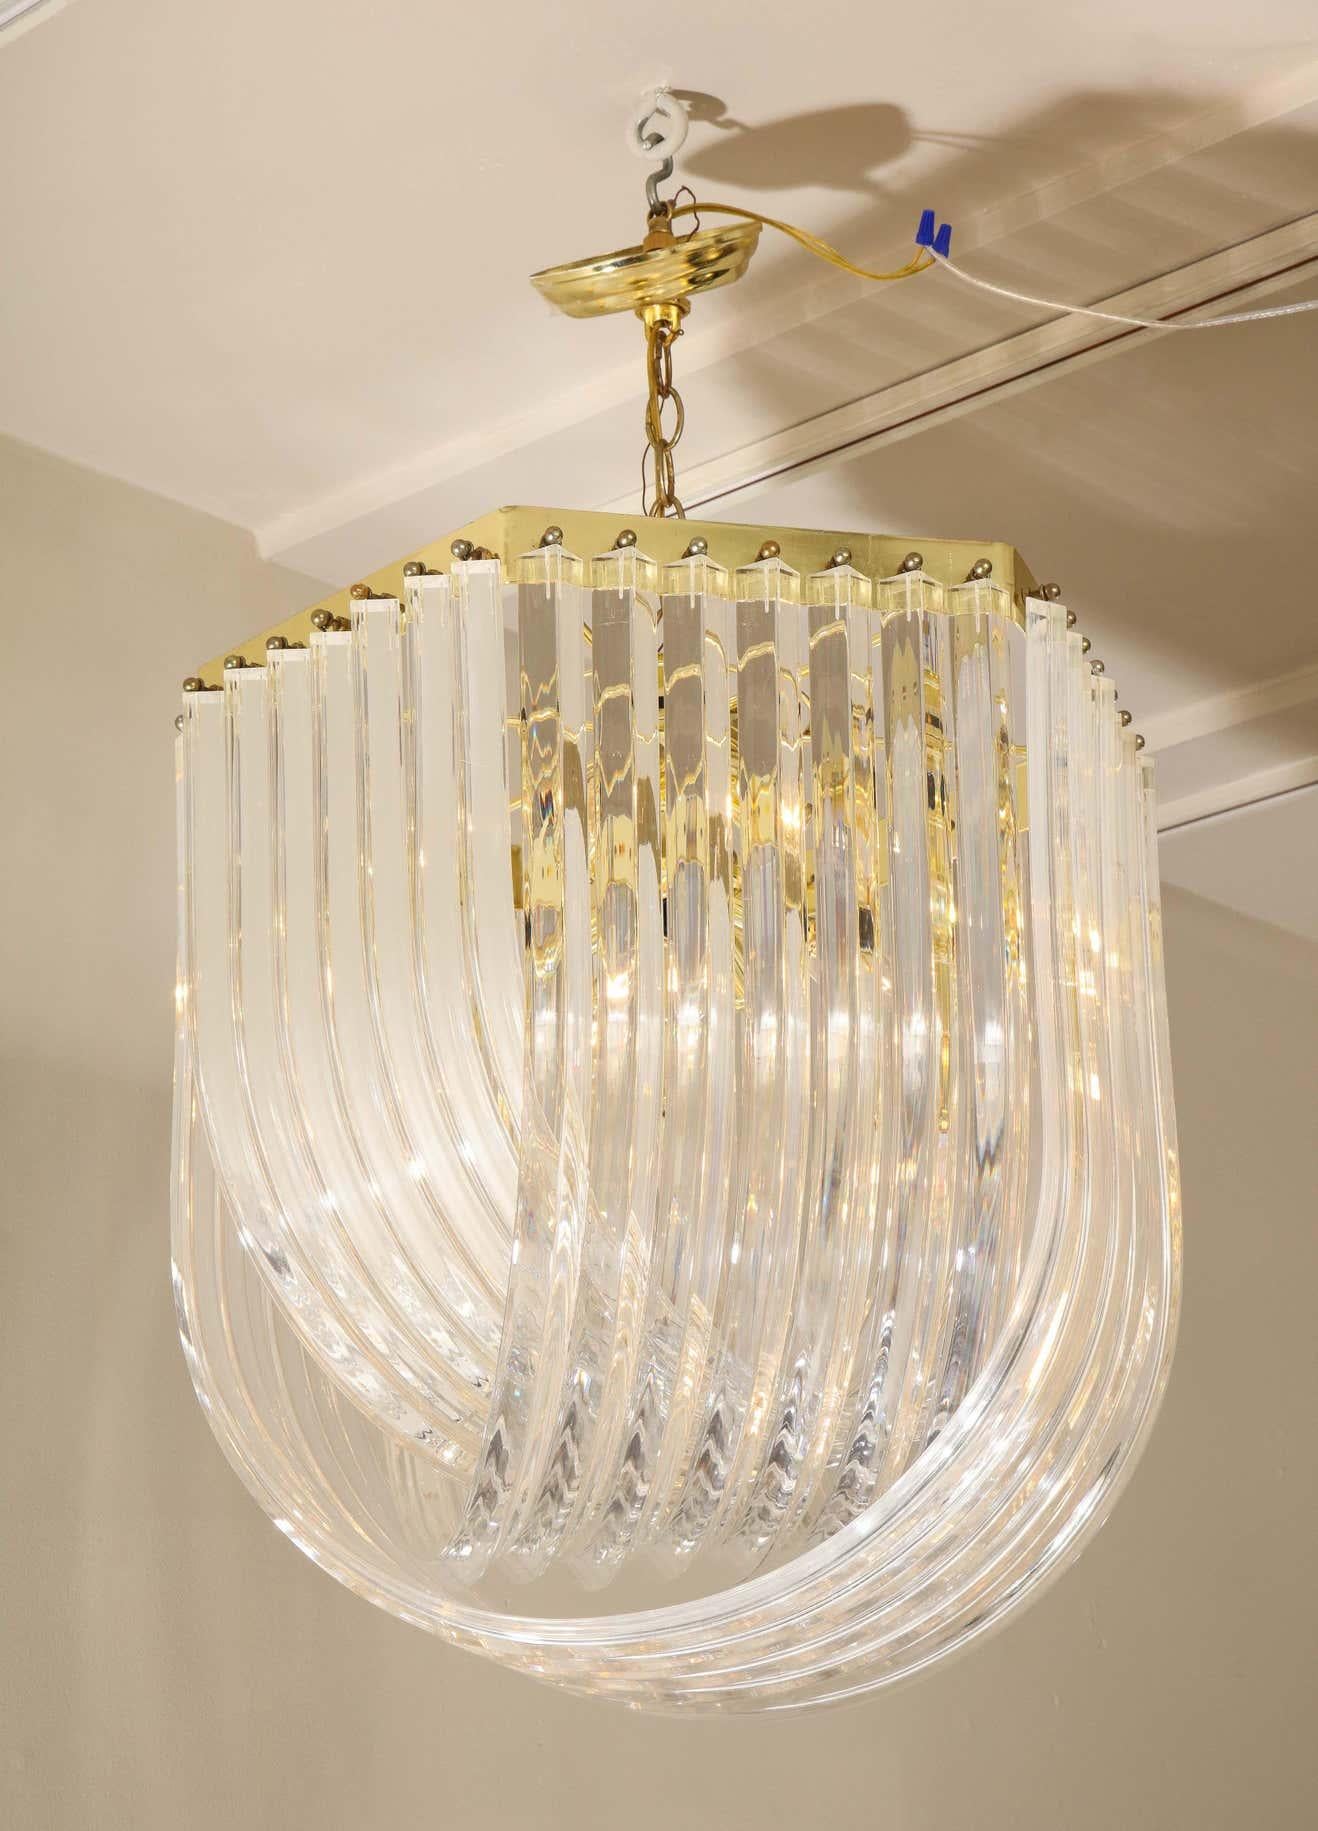 Midcentury Curved Lucite Ribbon Chandelier in Brass For Sale 2